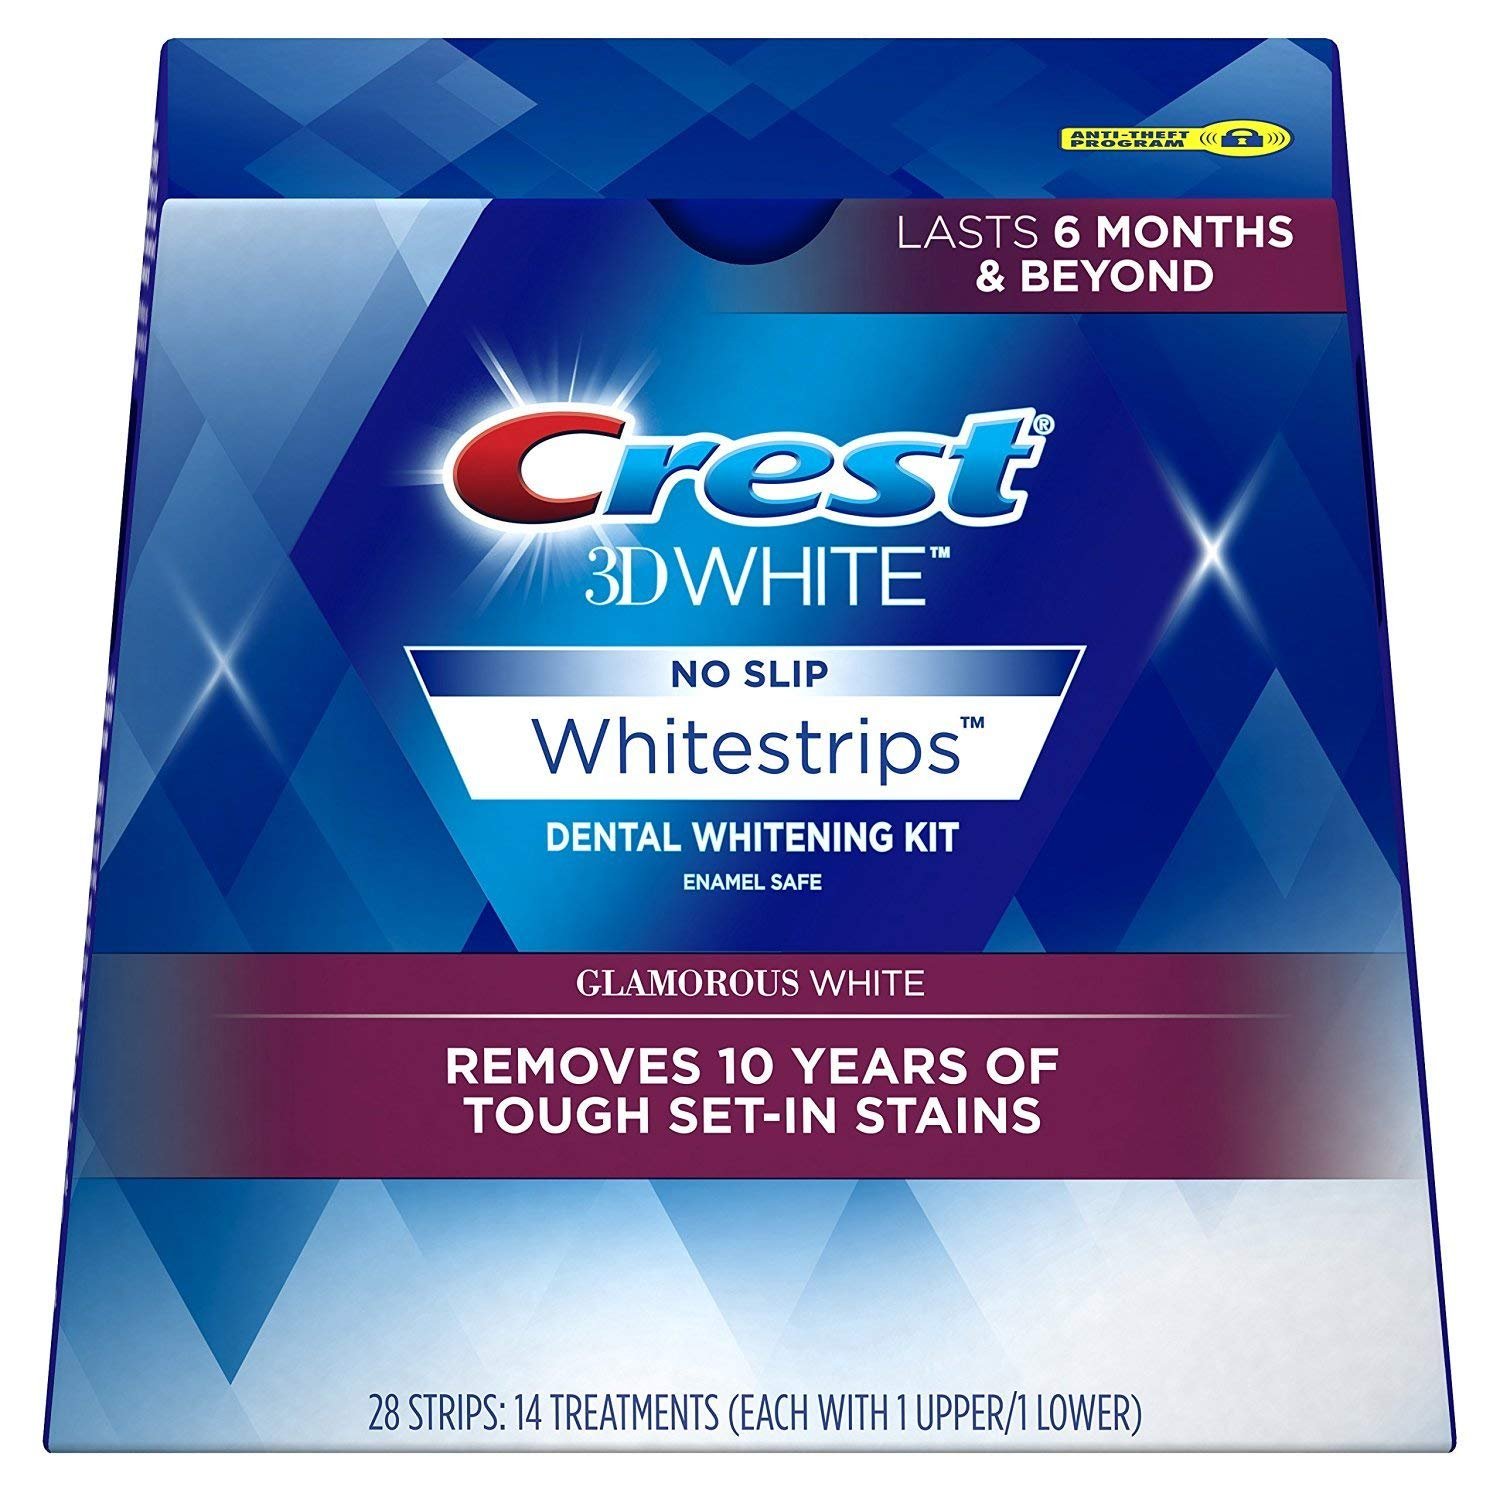 Crest 3D Whitestrips, Professional Effects Plus, Teeth Whitening Strip Kit, 48 Strips (24 Count Pack)